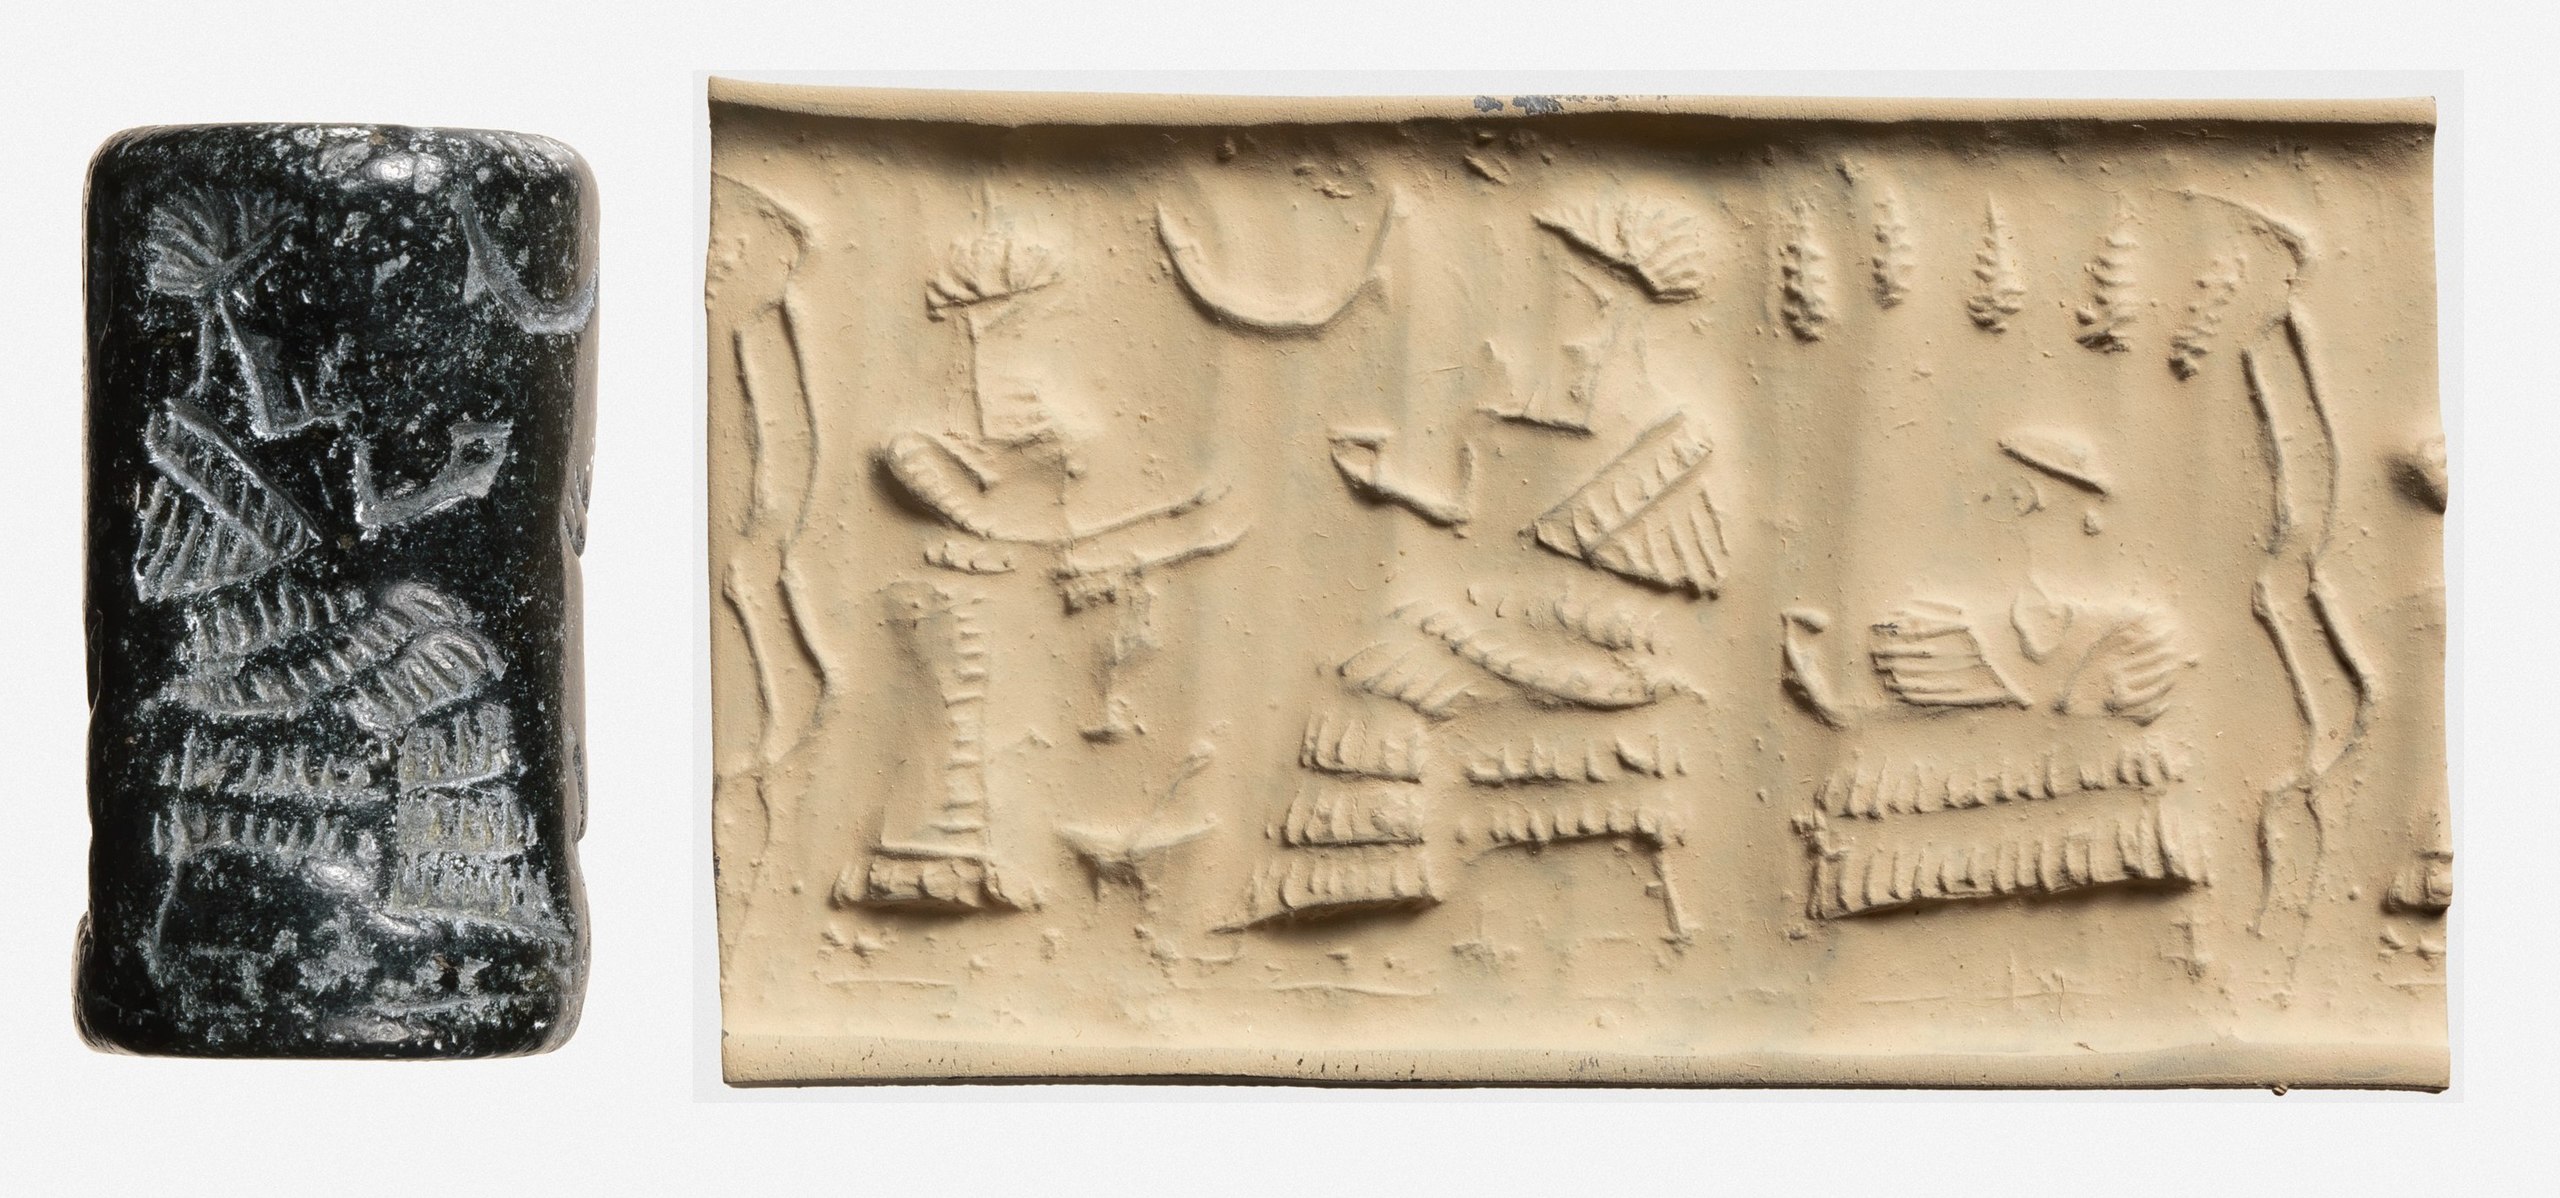 2560px-Cylinder_seal_and_modern_impression-_worshiper_before_a_seated_ruler_or_deity%3B_seated_female_under_a_grape_arbor_MET_DP370181.jpg